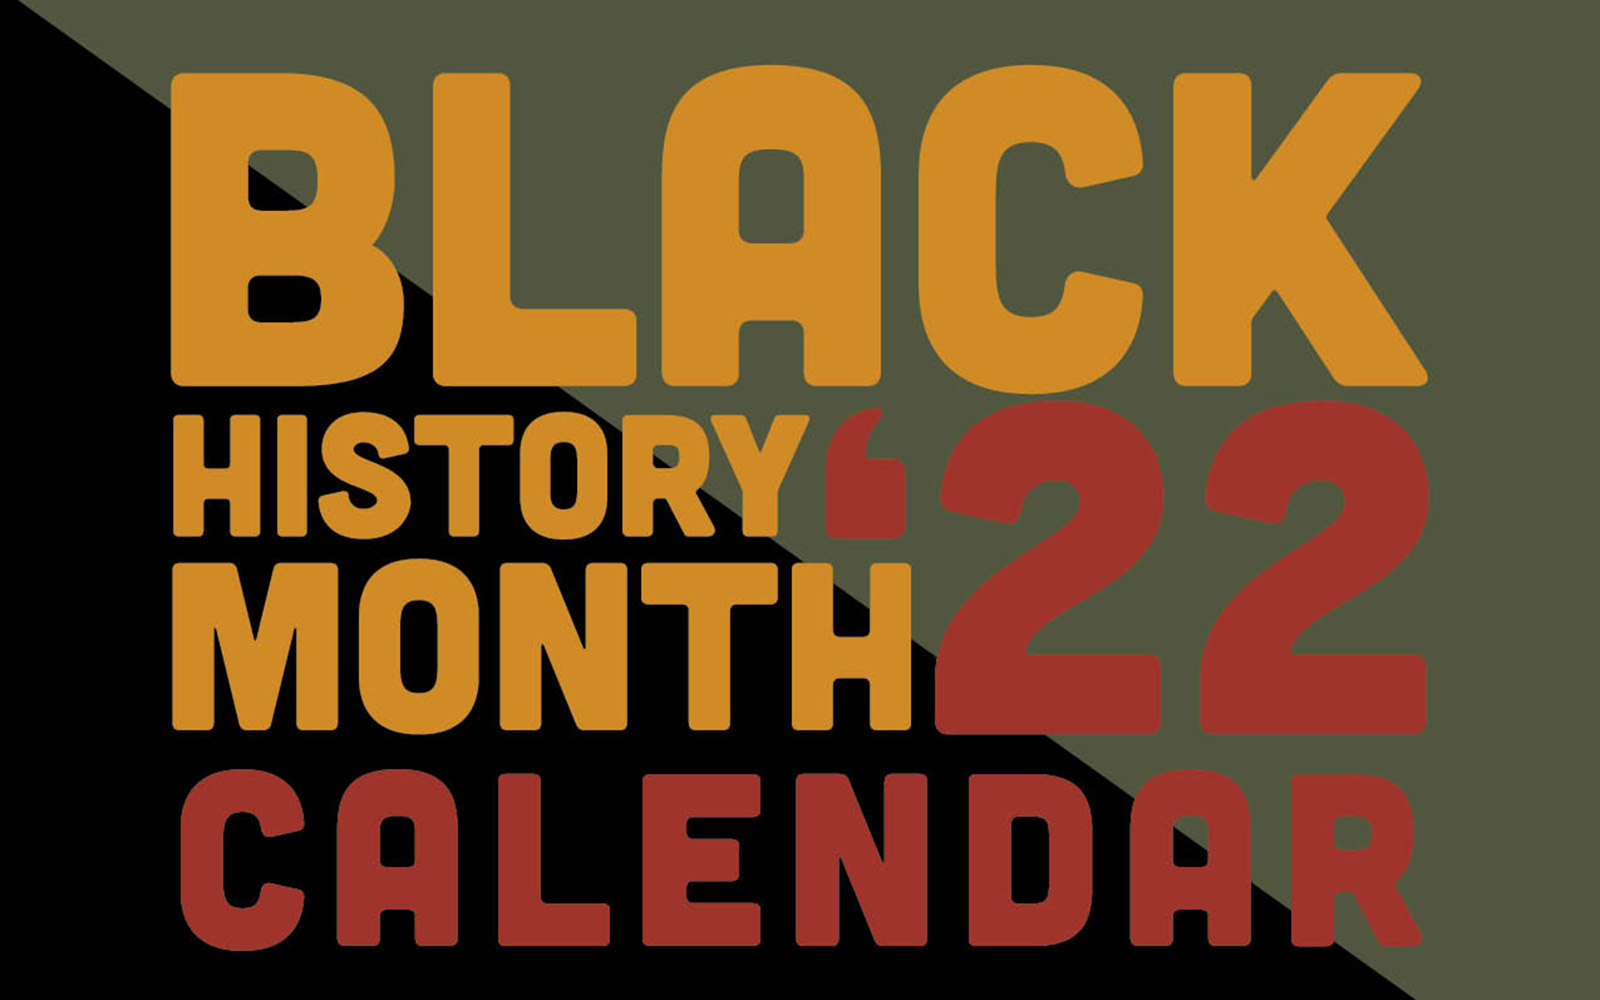 Msstate Academic Calendar 2022 Msu Celebrates Black History Month With Special Events In February | Mississippi  State University